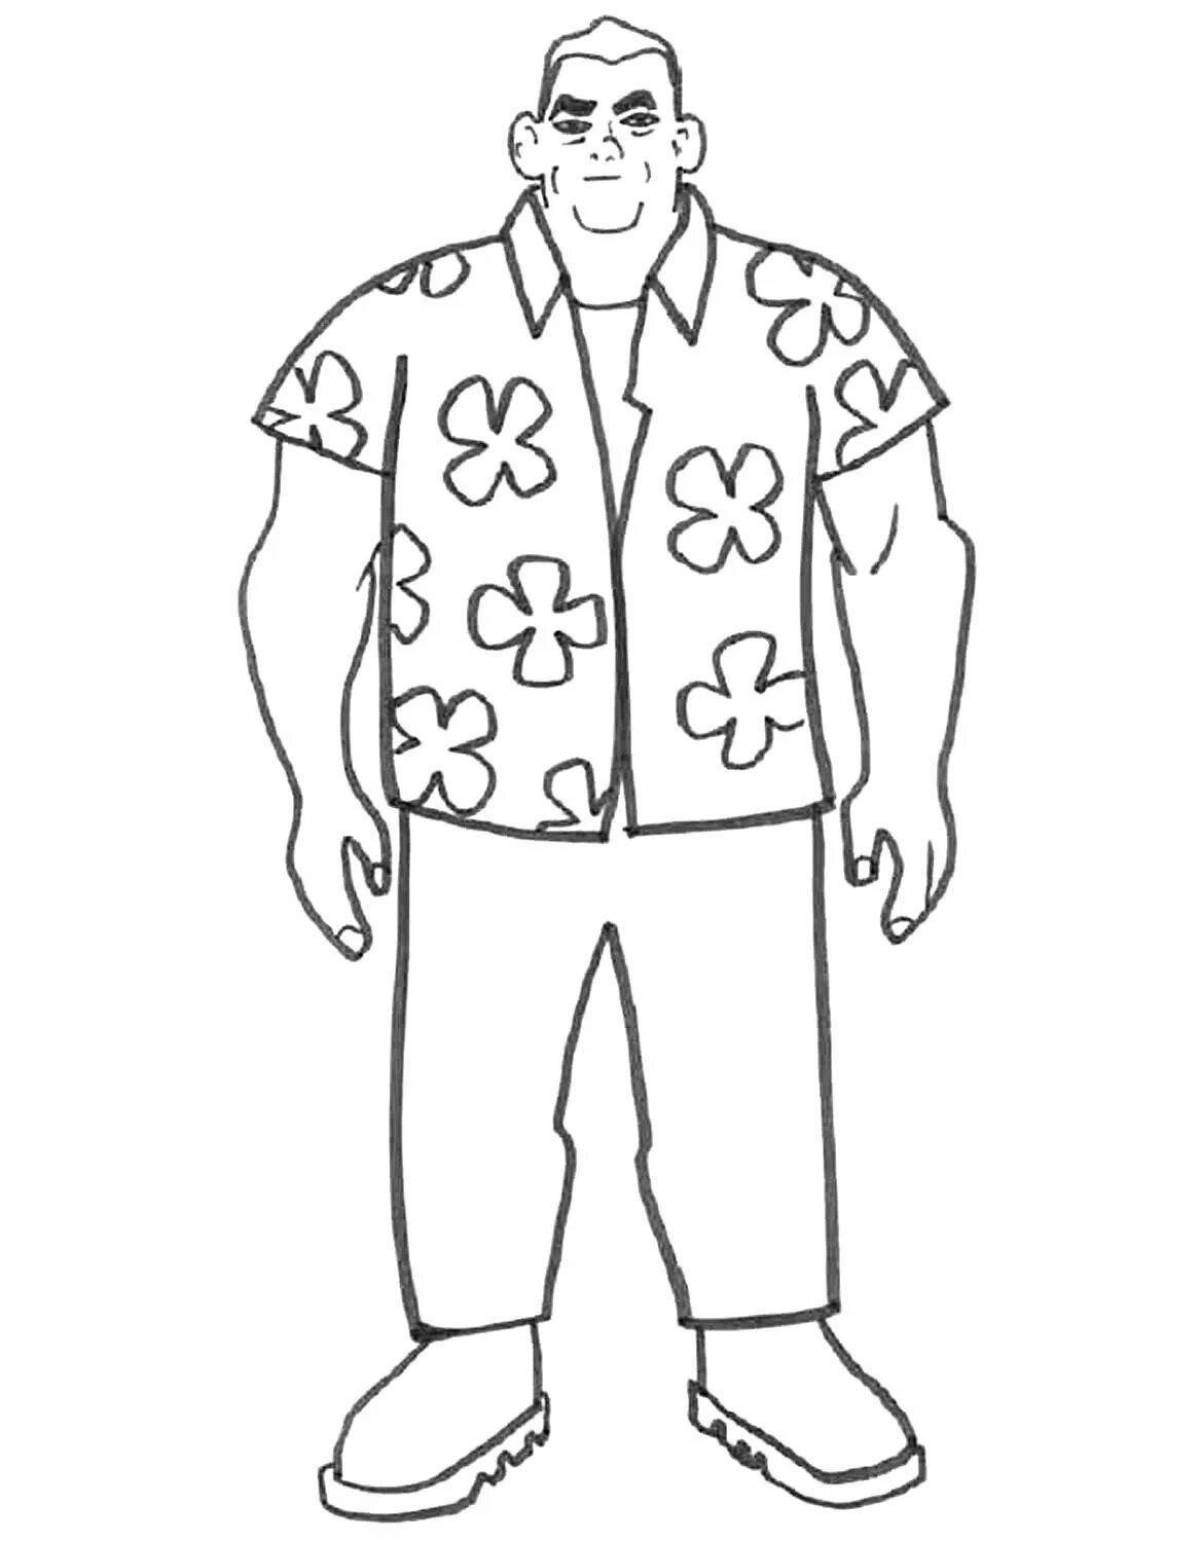 Coloring book happy man for kids